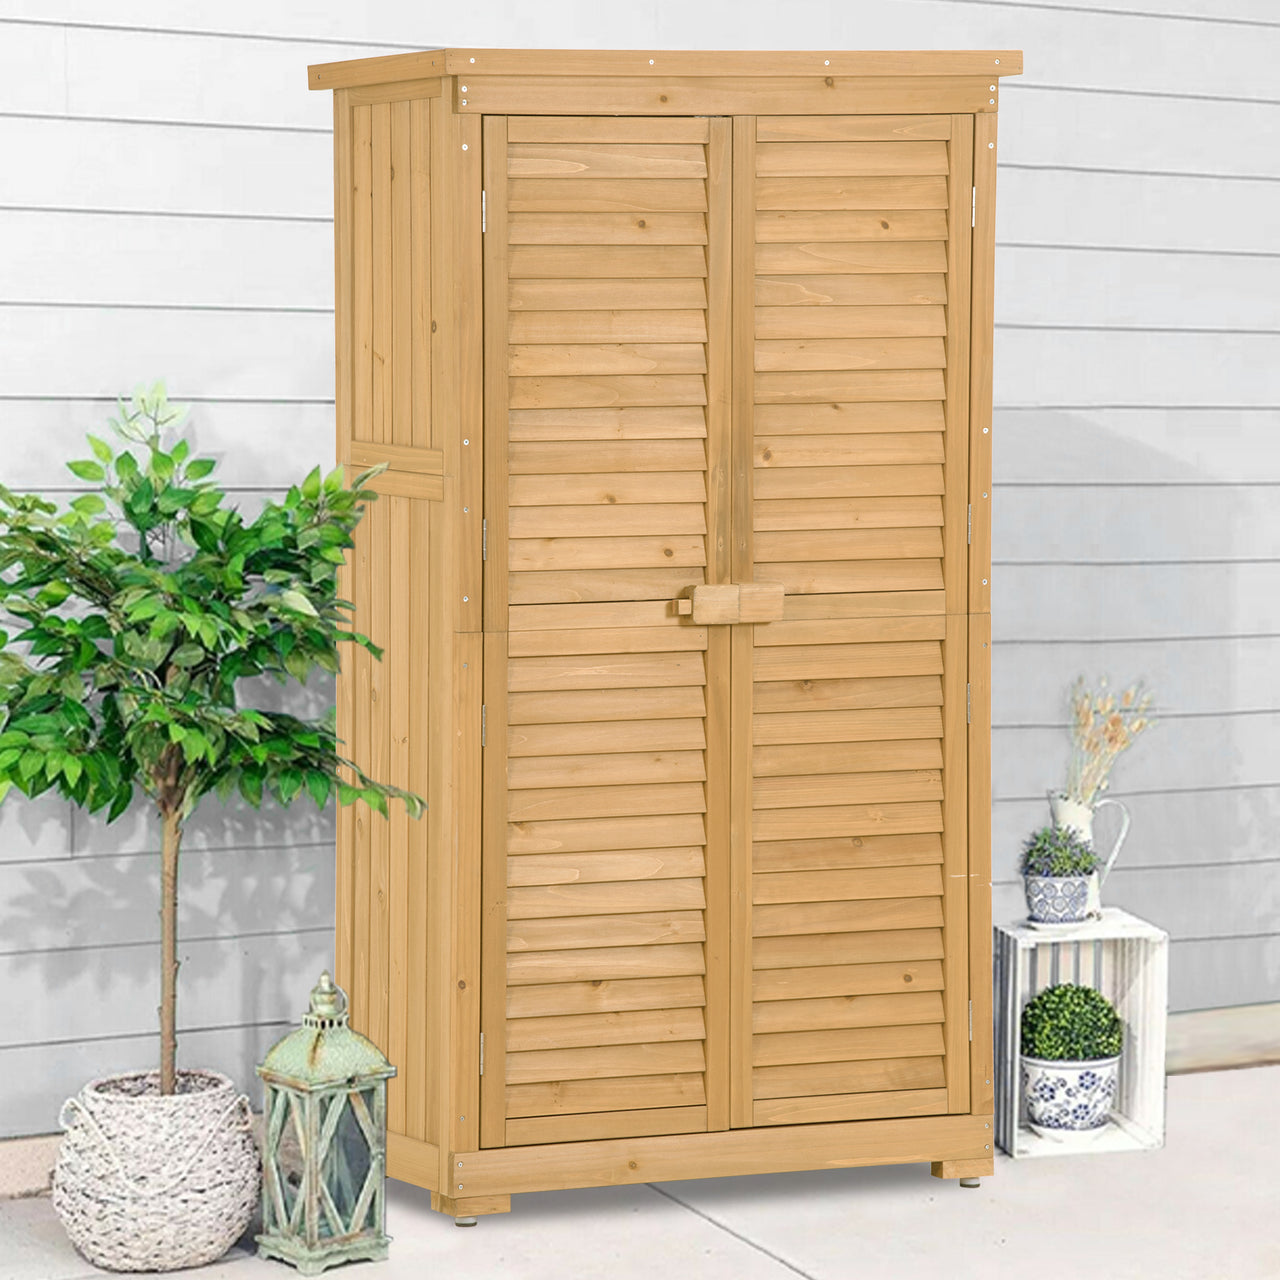 Wooden Garden Shed 3-tier Patio Storage Cabinet Outdoor Organizer Wooden Lockers with Fir Wood (Natural Wood Color -Shutter Design)